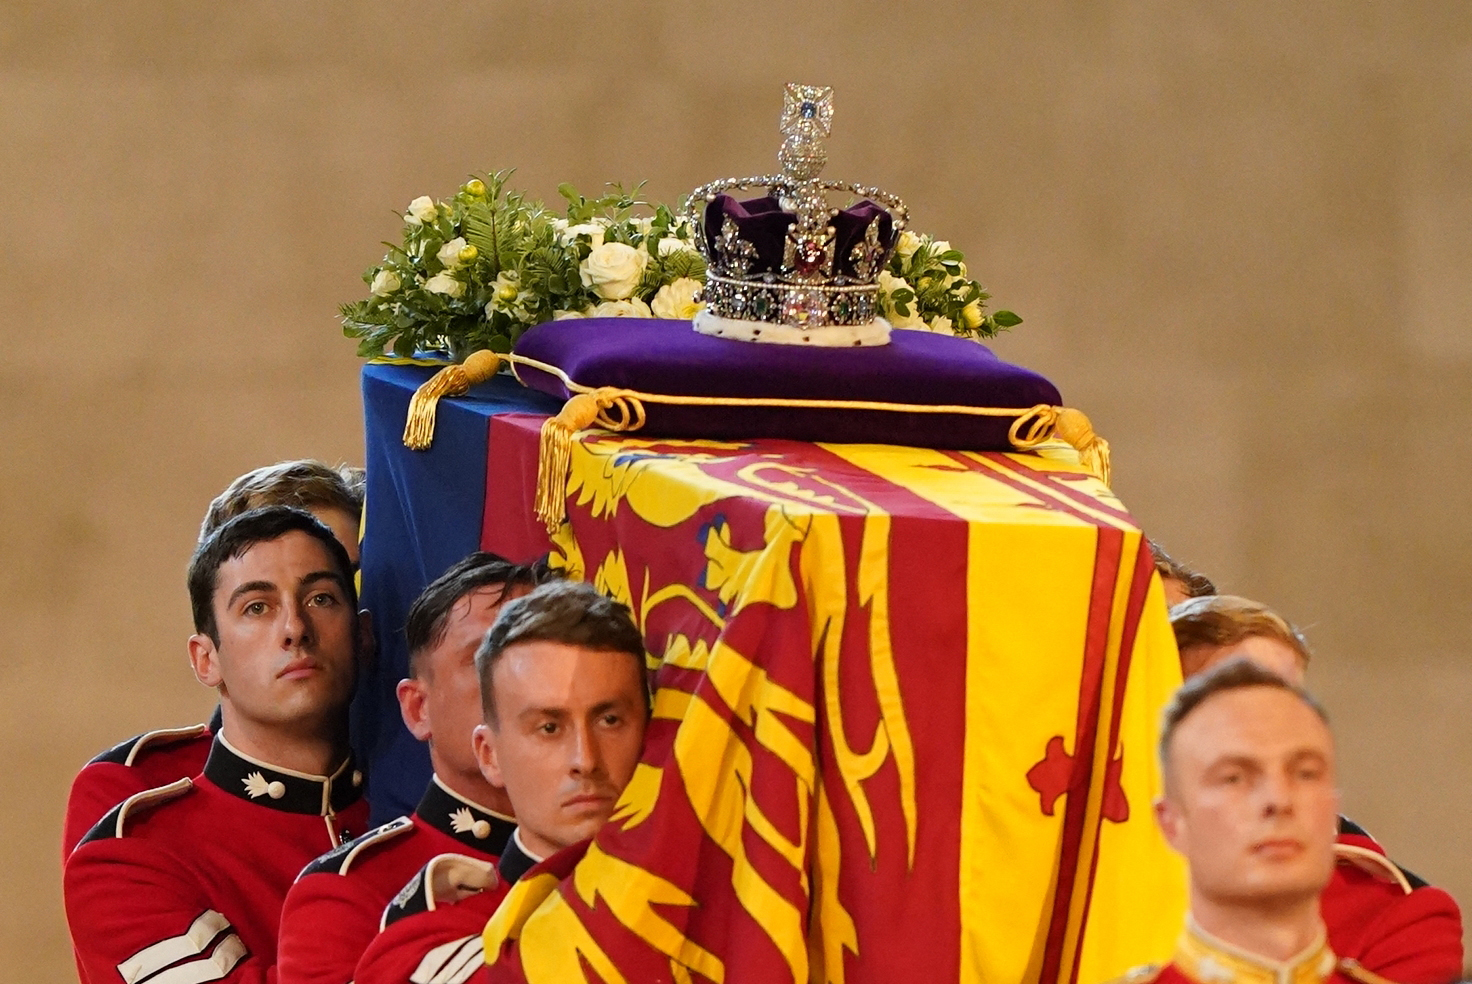 Pallbearers from The Queen's Company at Queen Elizabeth II's funeral at the Palace of Westminster in London on September 14, 2022 | Source: Getty Images